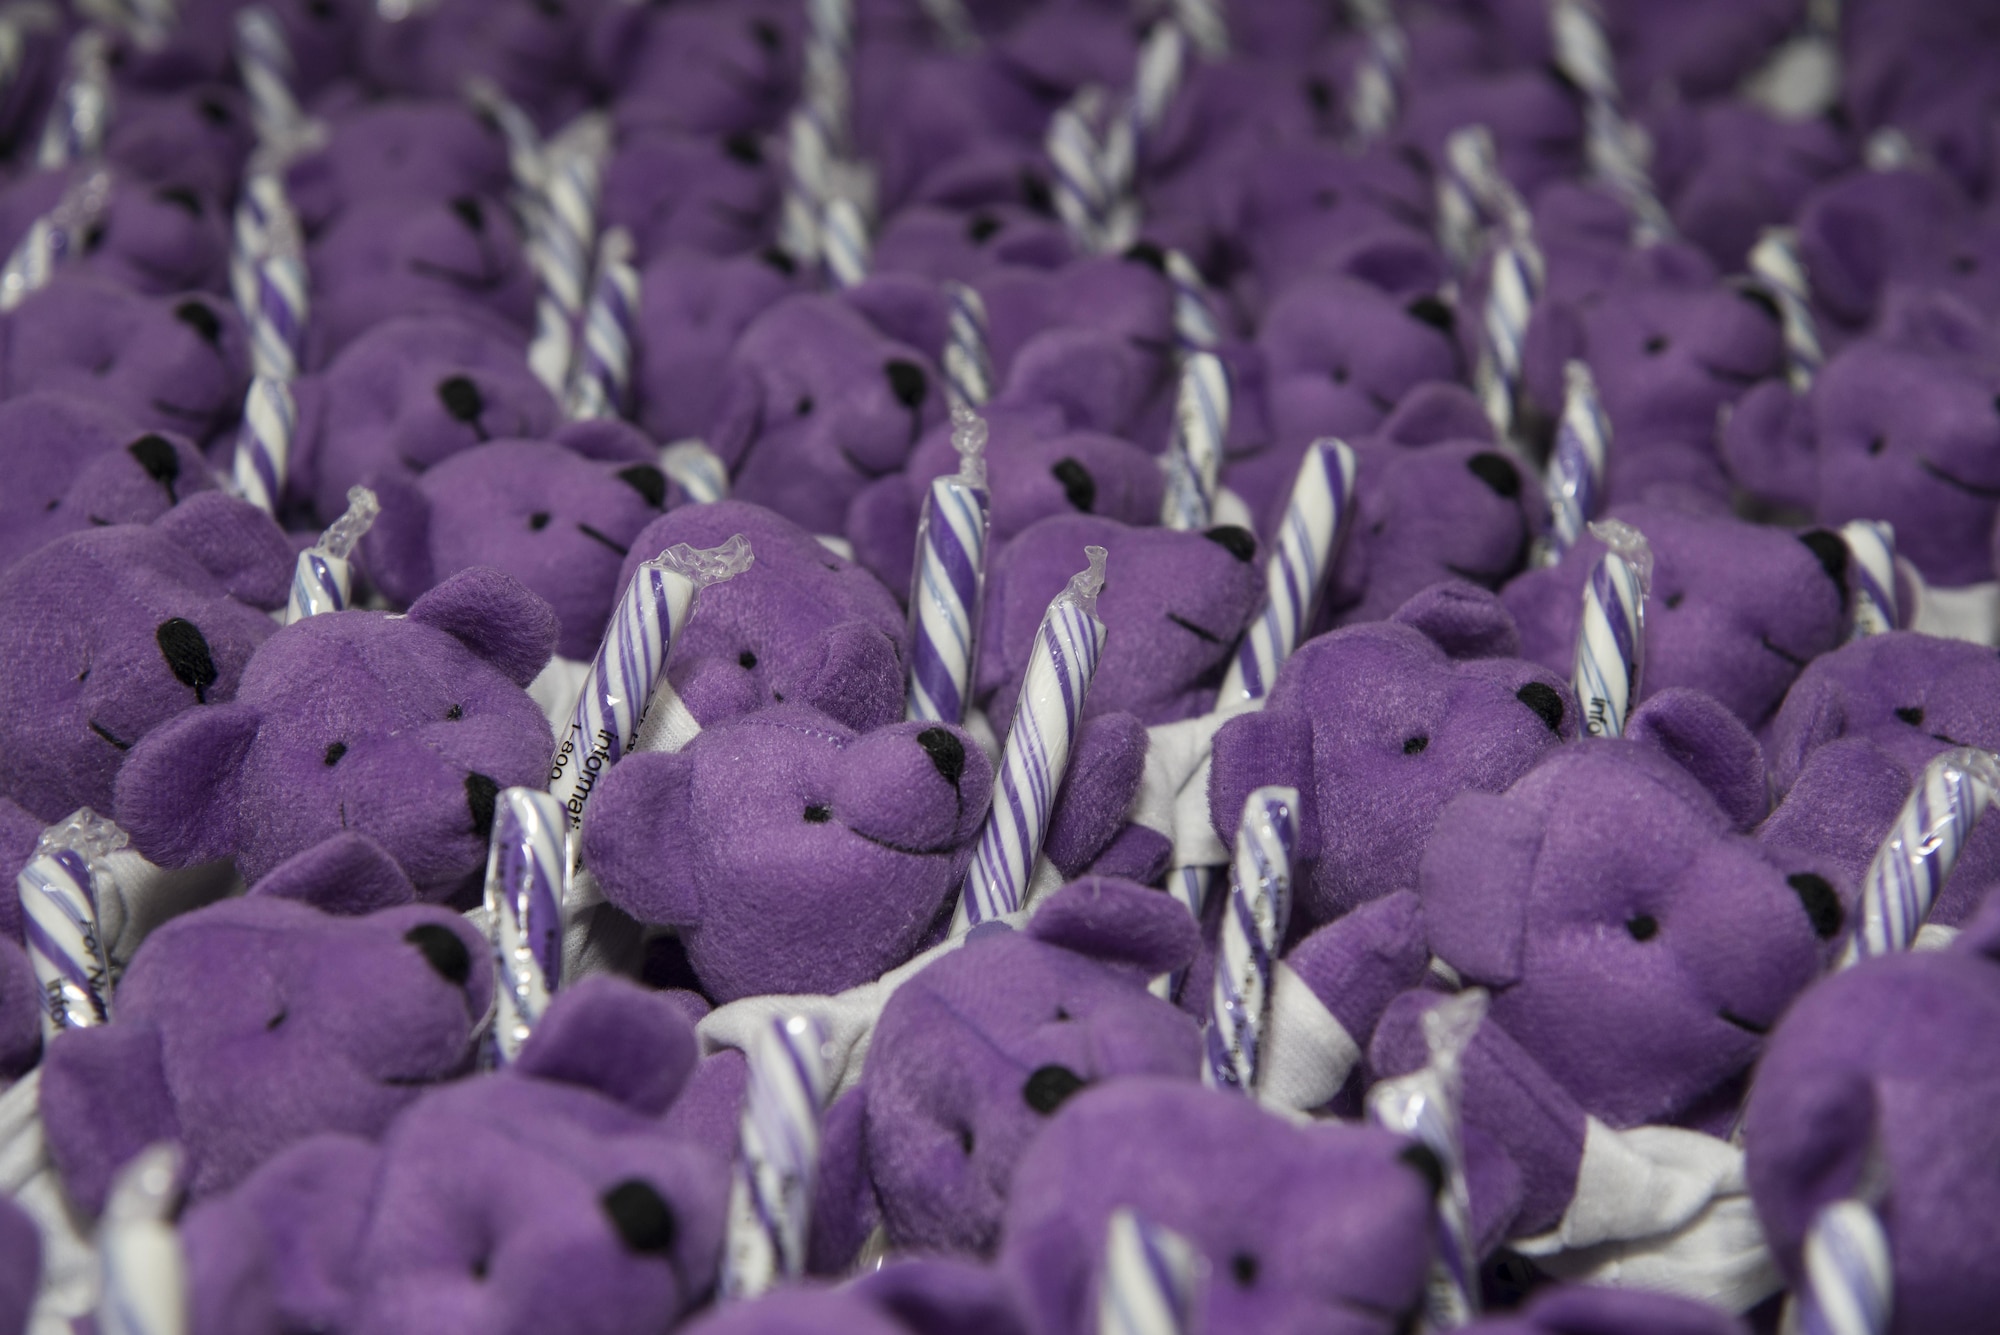 Plush purple bears stand in a tight formation at Team Dover’s inaugural Purple Ball April 29, 2017, at the Youth Center on Dover Air Force Base, Del. The stuffed animals were handed out as parting gifts during the Month of the Military Child event. (U.S. Air Force photo by Senior Airman Aaron J. Jenne)